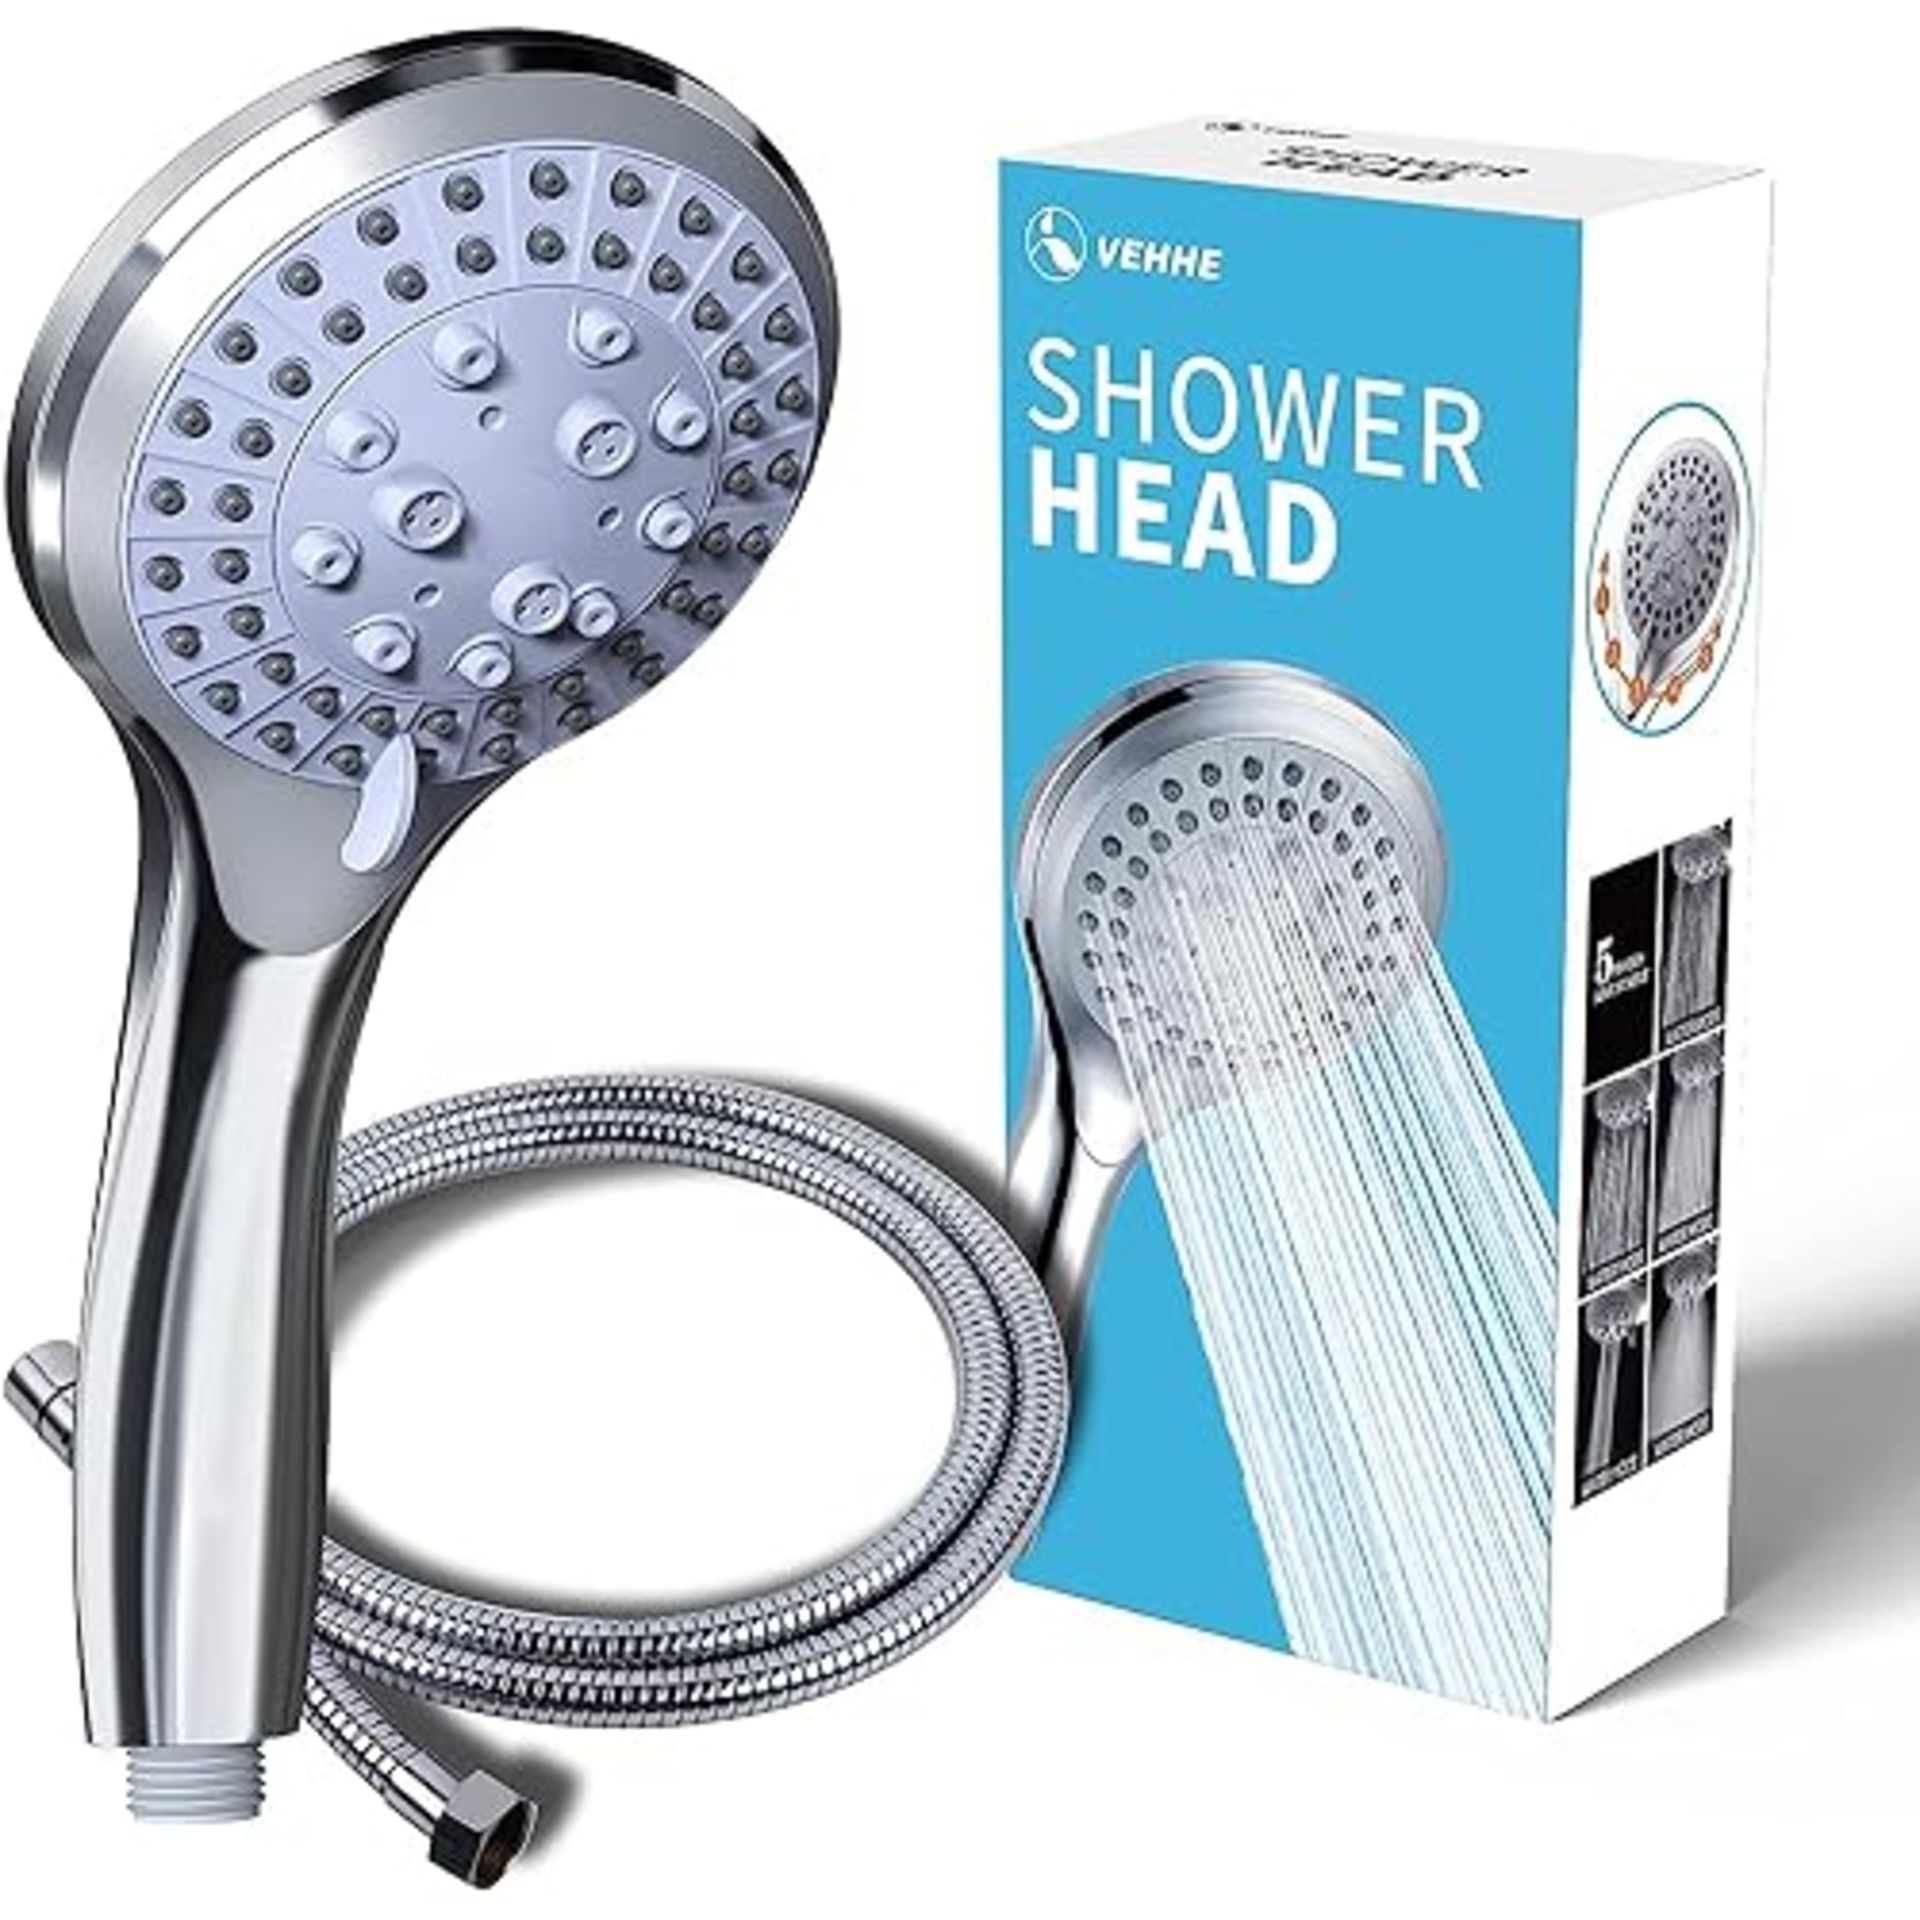 VEHHE Shower Head Powerful Flow with 1.5m Chrome Hose Pressure Boosting Shower Head Spray with 5 Mo